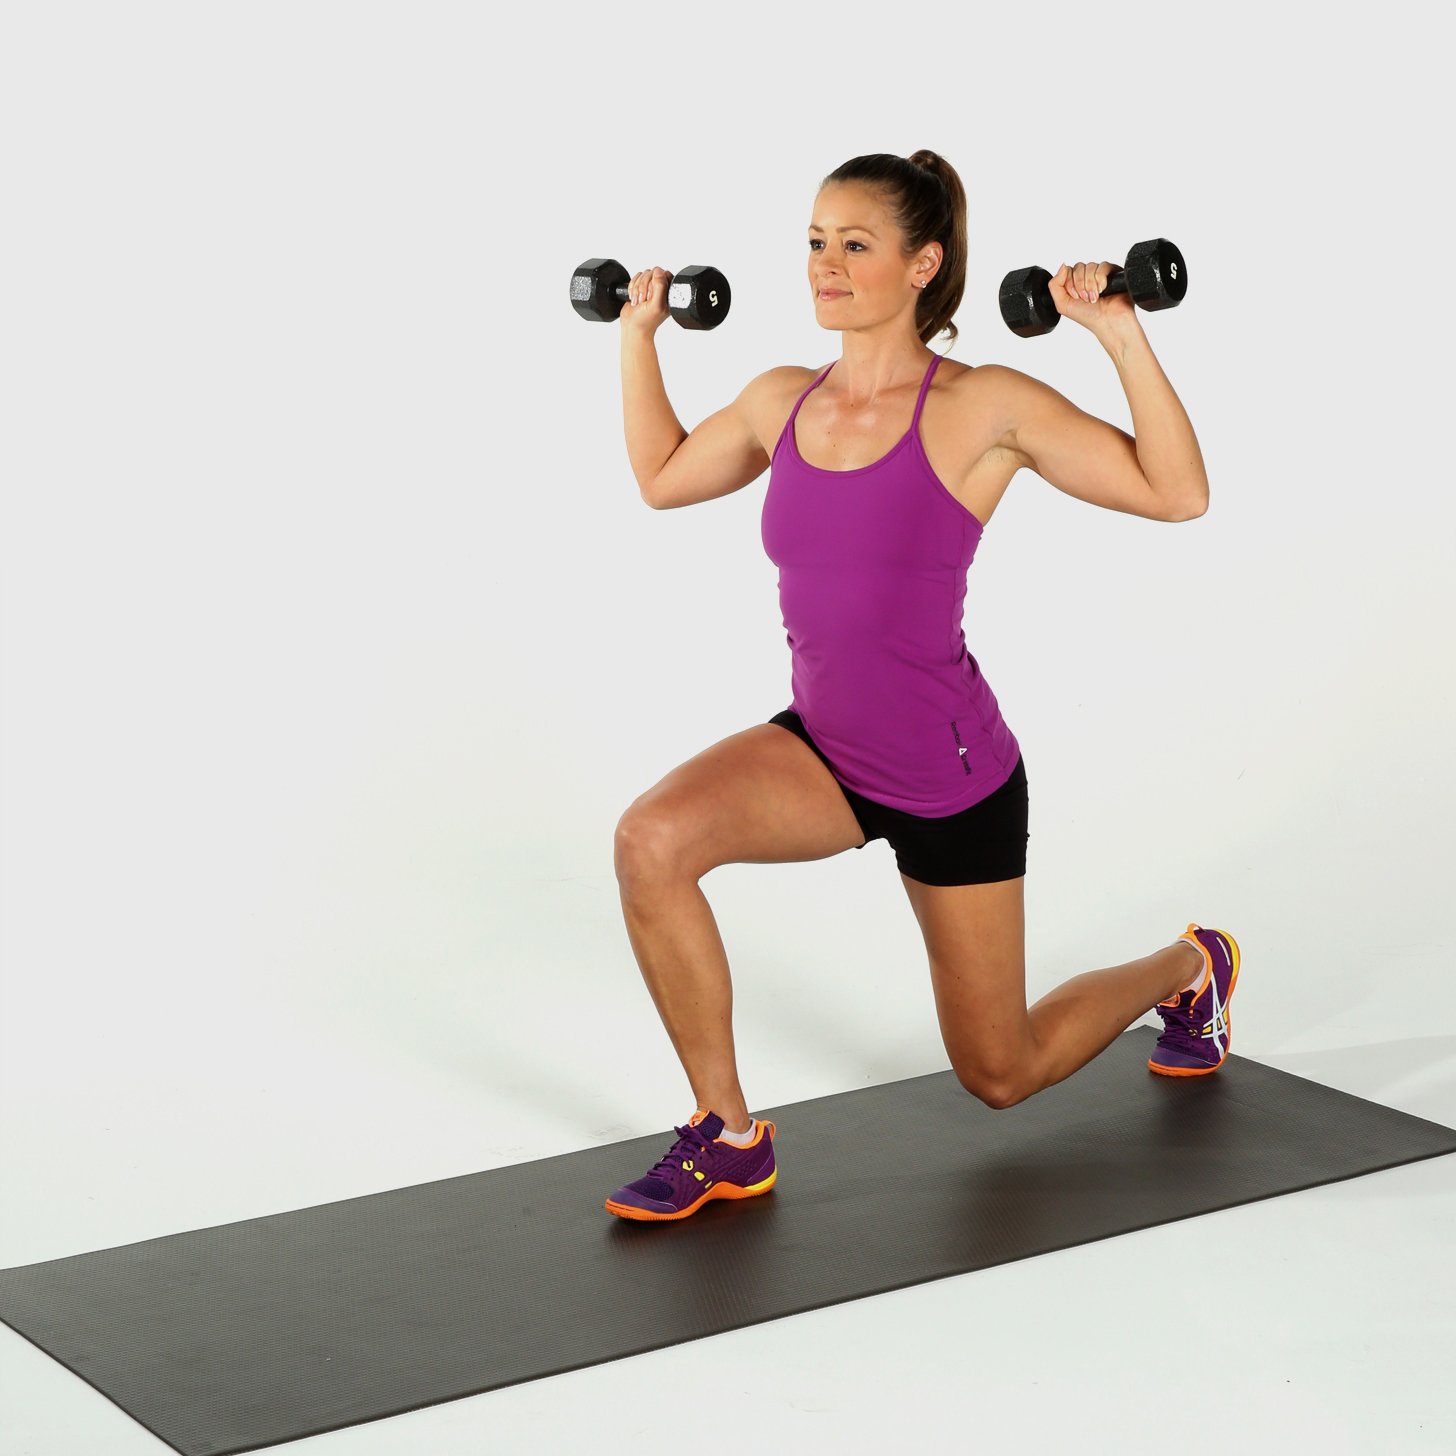 Weight Training For Women | Dumbbell Circuit Workout | POPSUGAR Fitness